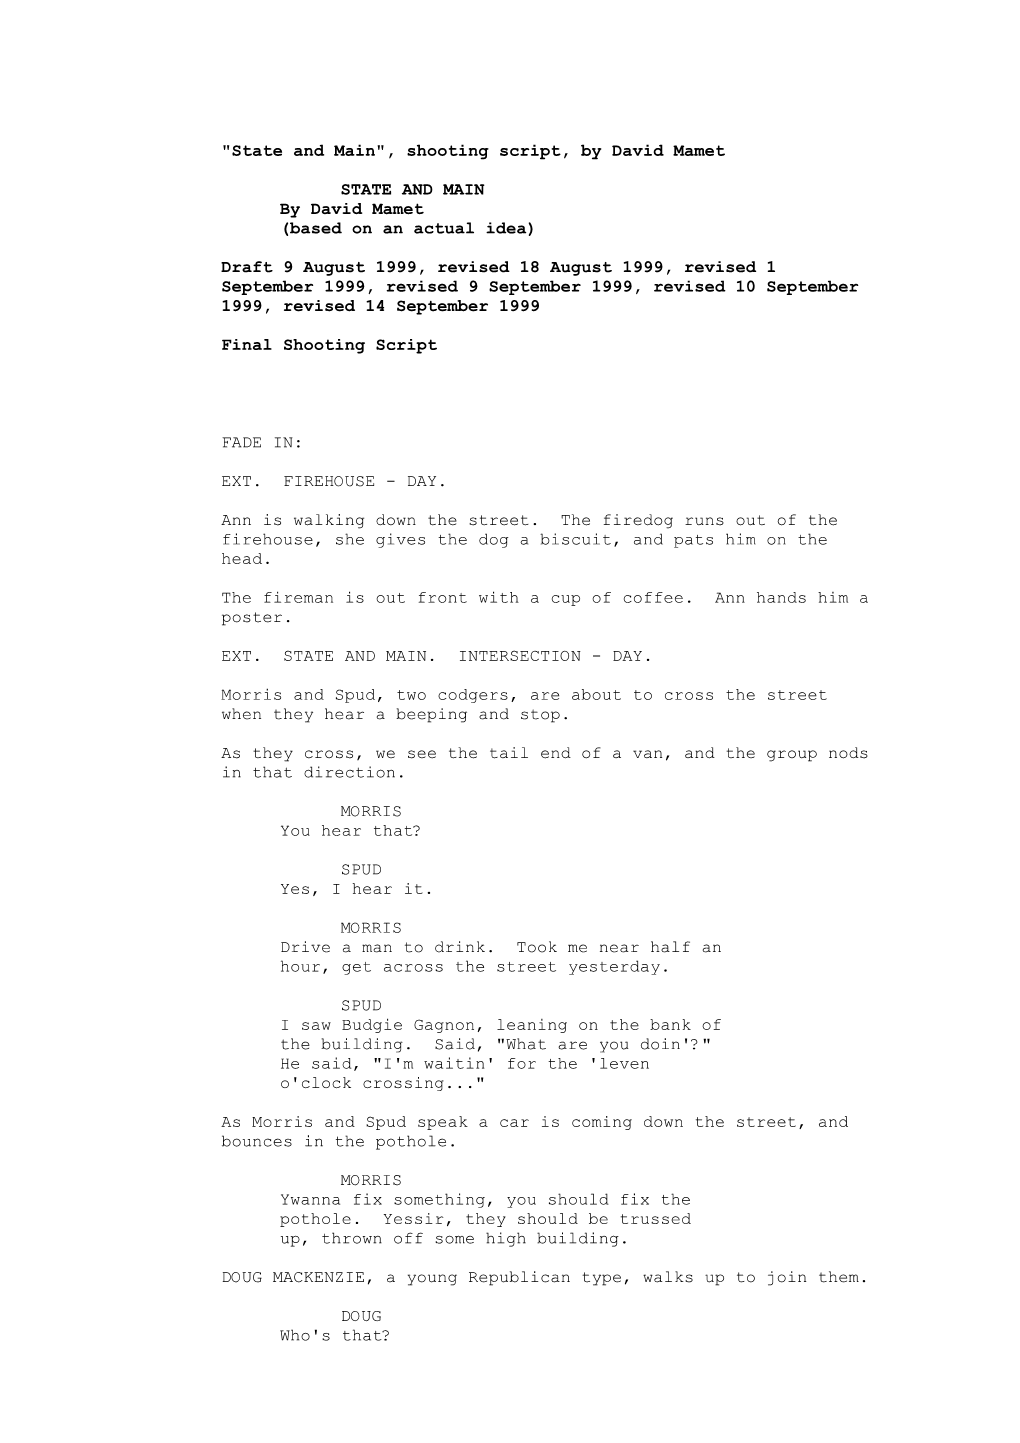 State and Main", Shooting Script, by David Mamet